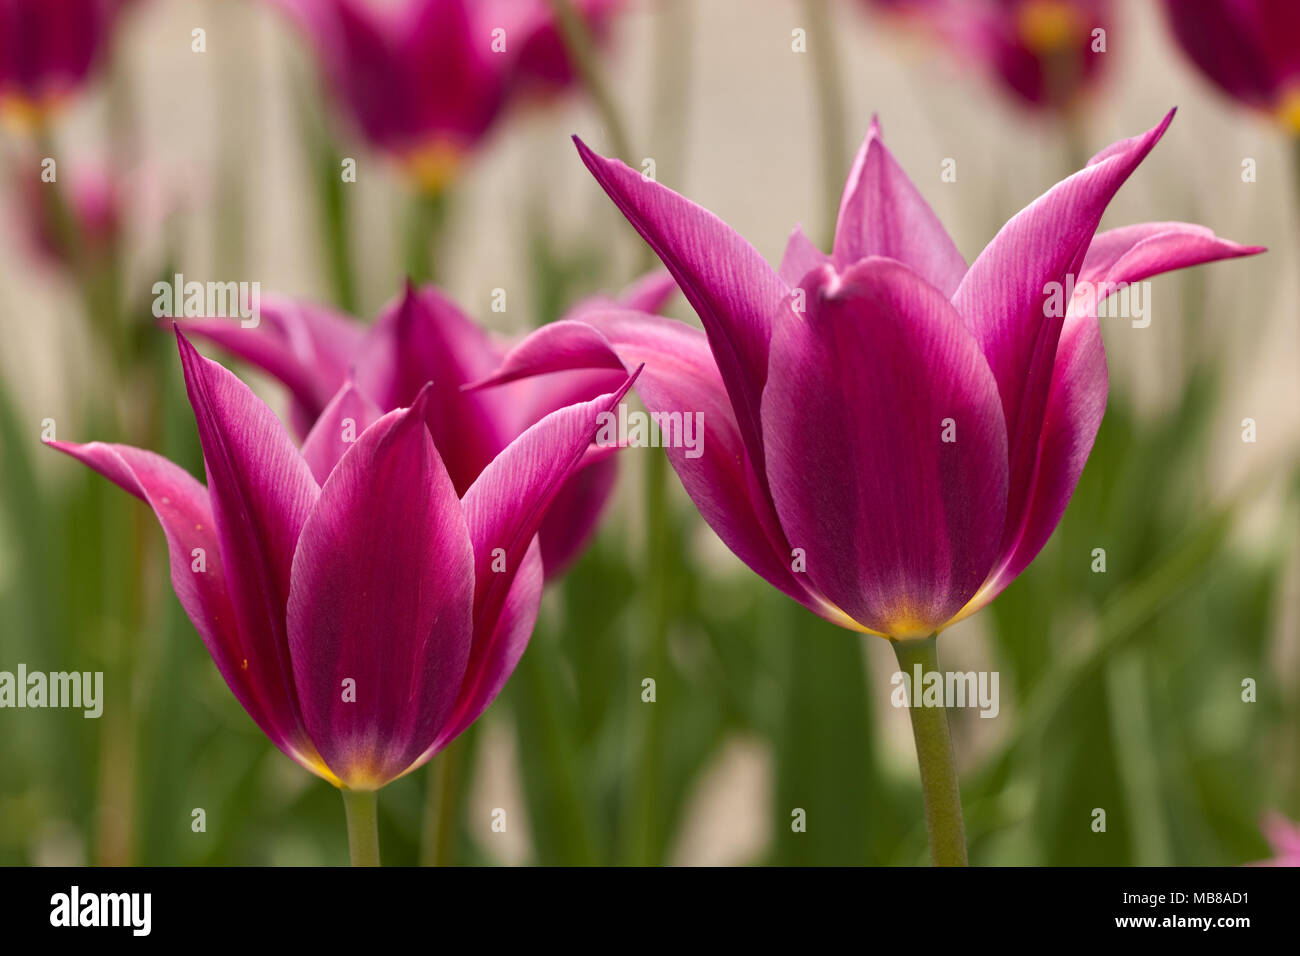 'Maytime' Lily Flowered Tulip (Tulipa Gesneriana, Liljetulpan) Banque D'Images